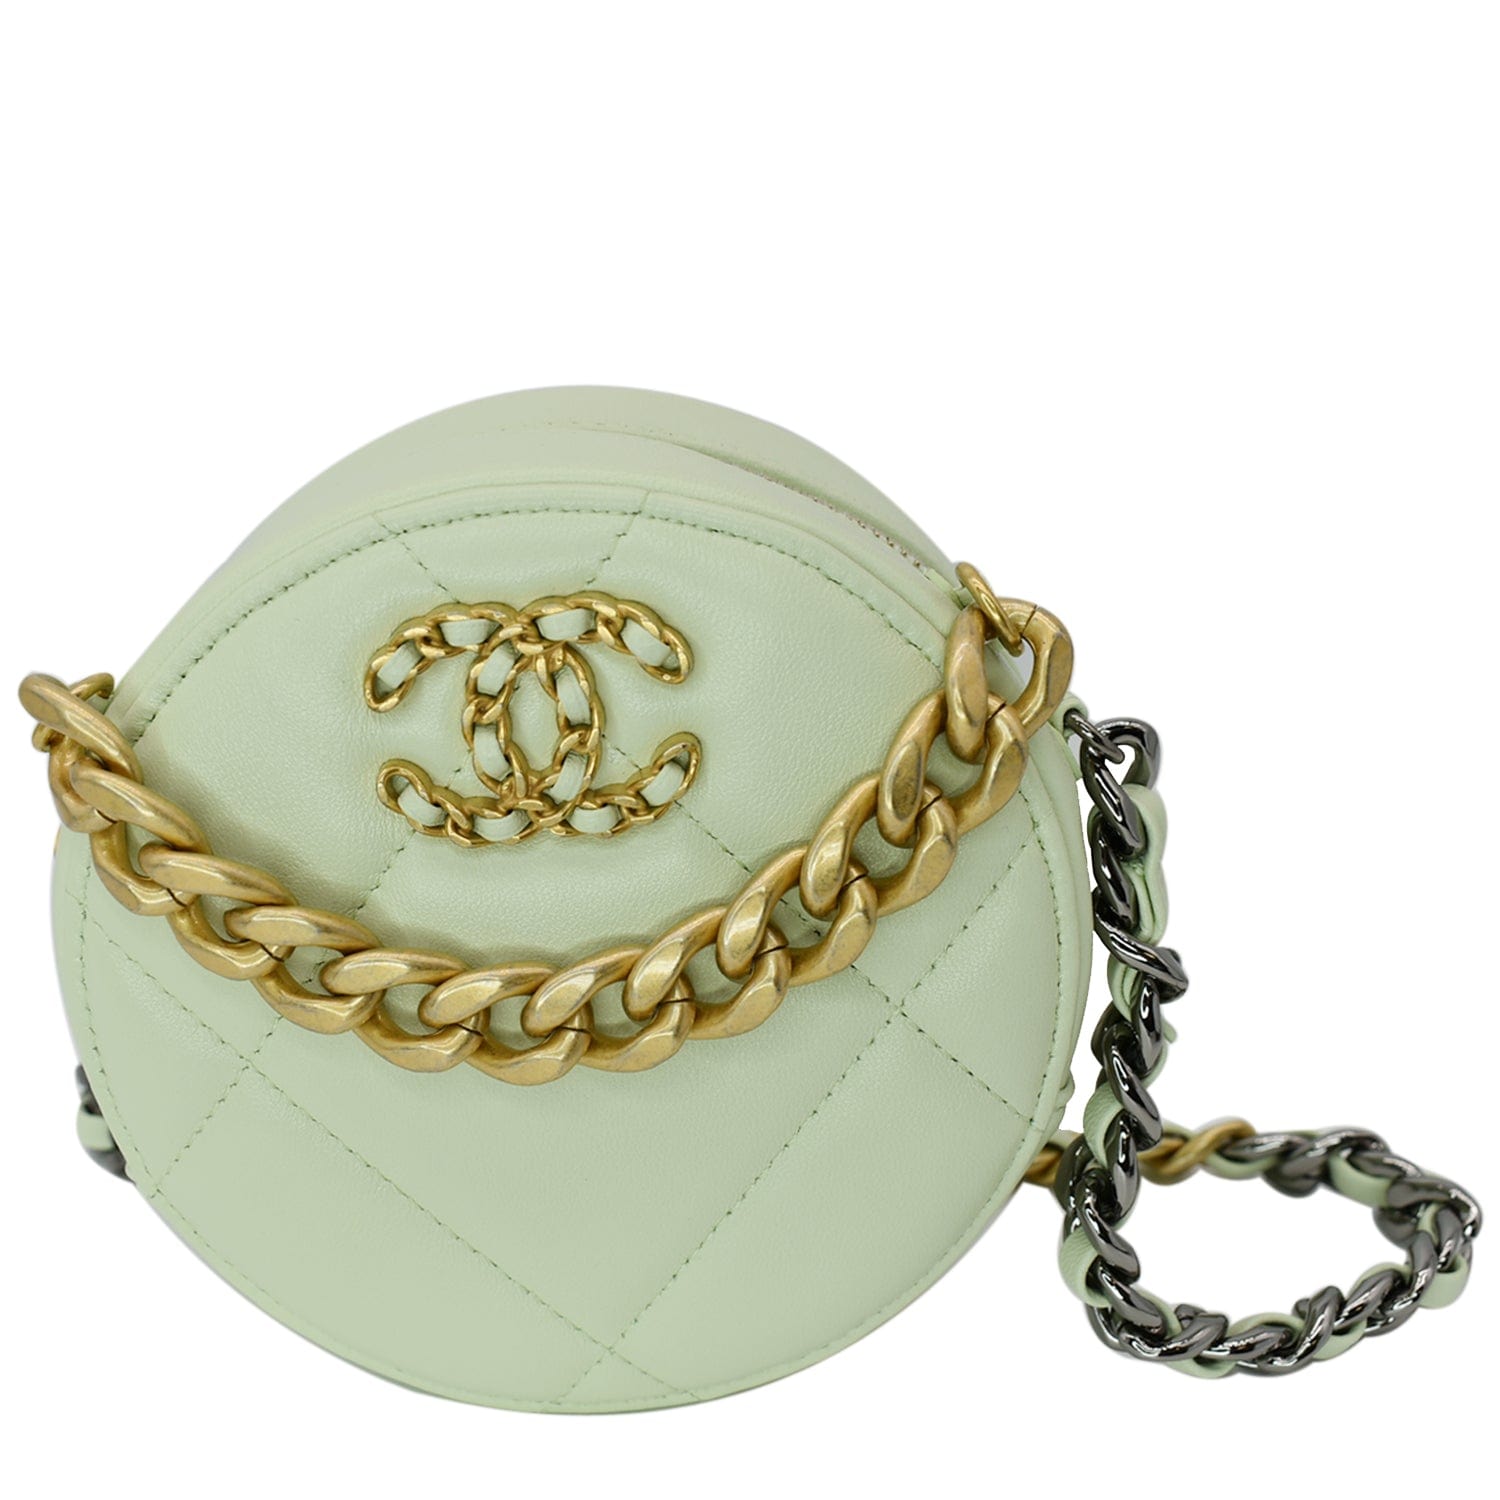 Clutch with chain  Lambskin  gold metal  white  Fashion  CHANEL